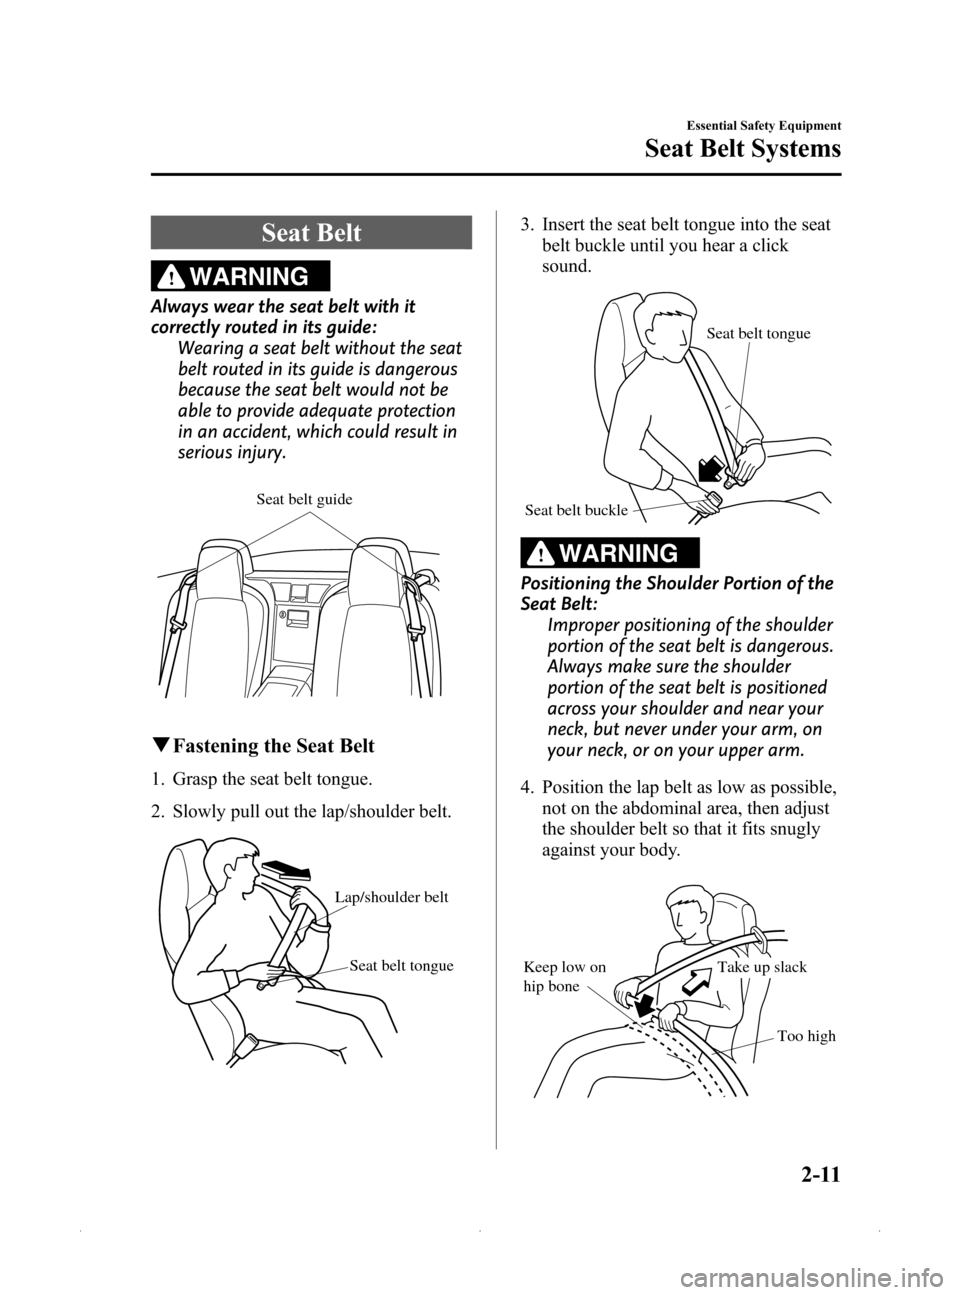 MAZDA MODEL MX-5 2015  Owners Manual (in English) Black plate (23,1)
Seat Belt
WARNING
Always wear the seat belt with it
correctly routed in its guide:Wearing a seat belt without the seat
belt routed in its guide is dangerous
because the seat belt wo